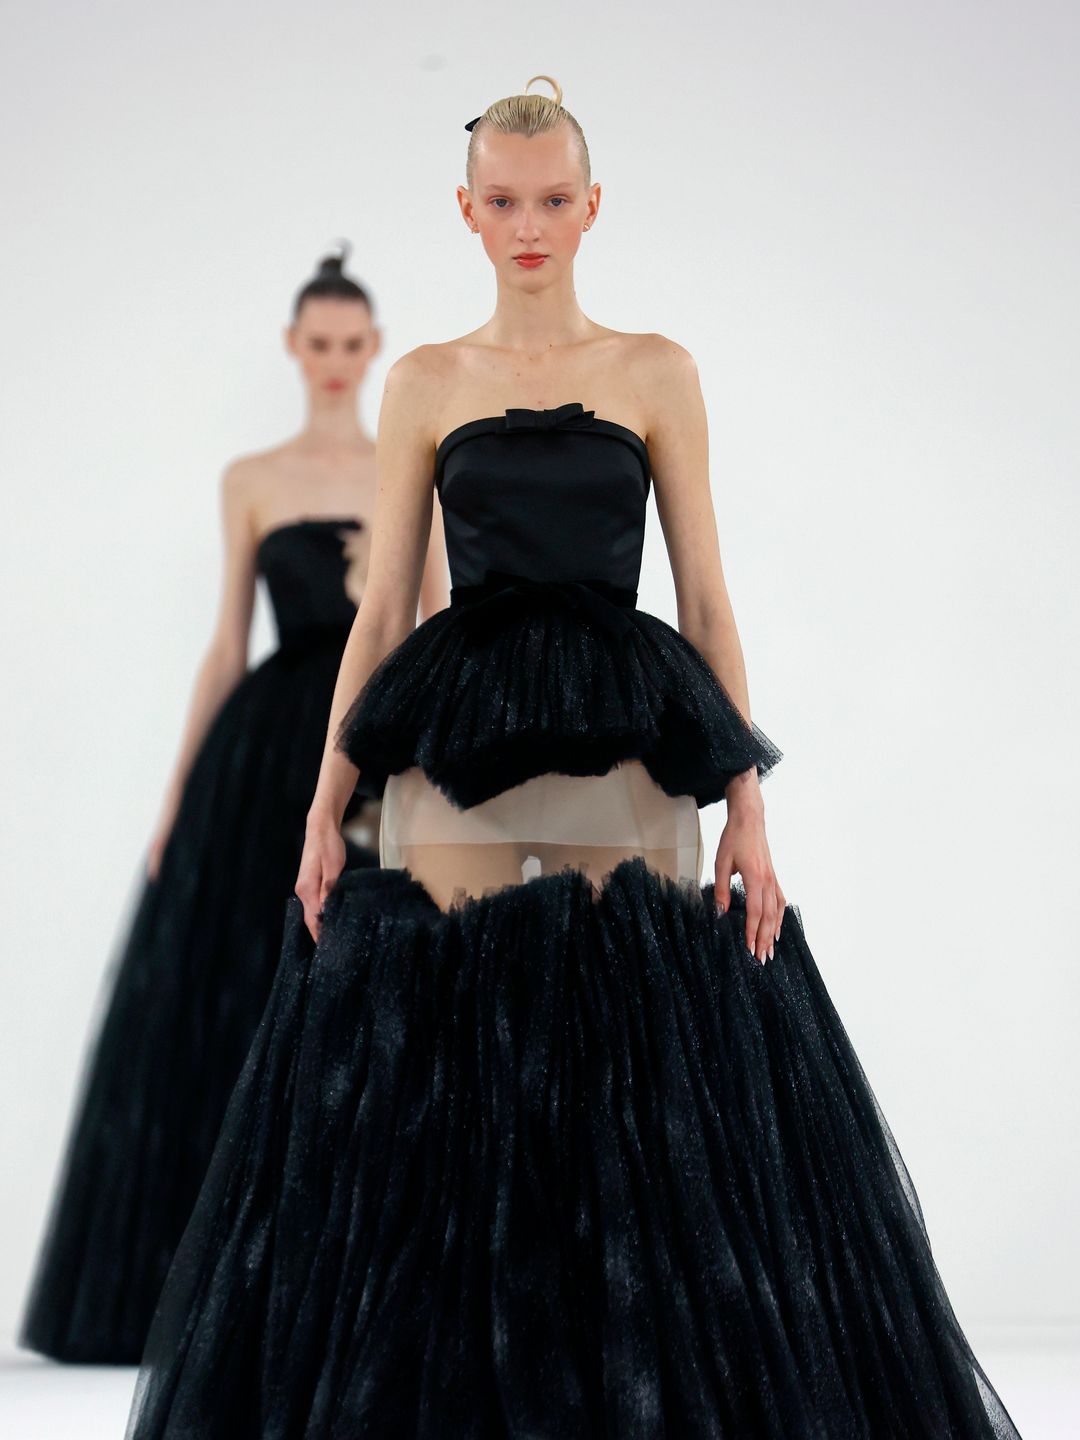  A model walks the runway during the Viktor & Rolf Haute Couture Spring/Summer show in a. black strapless gown